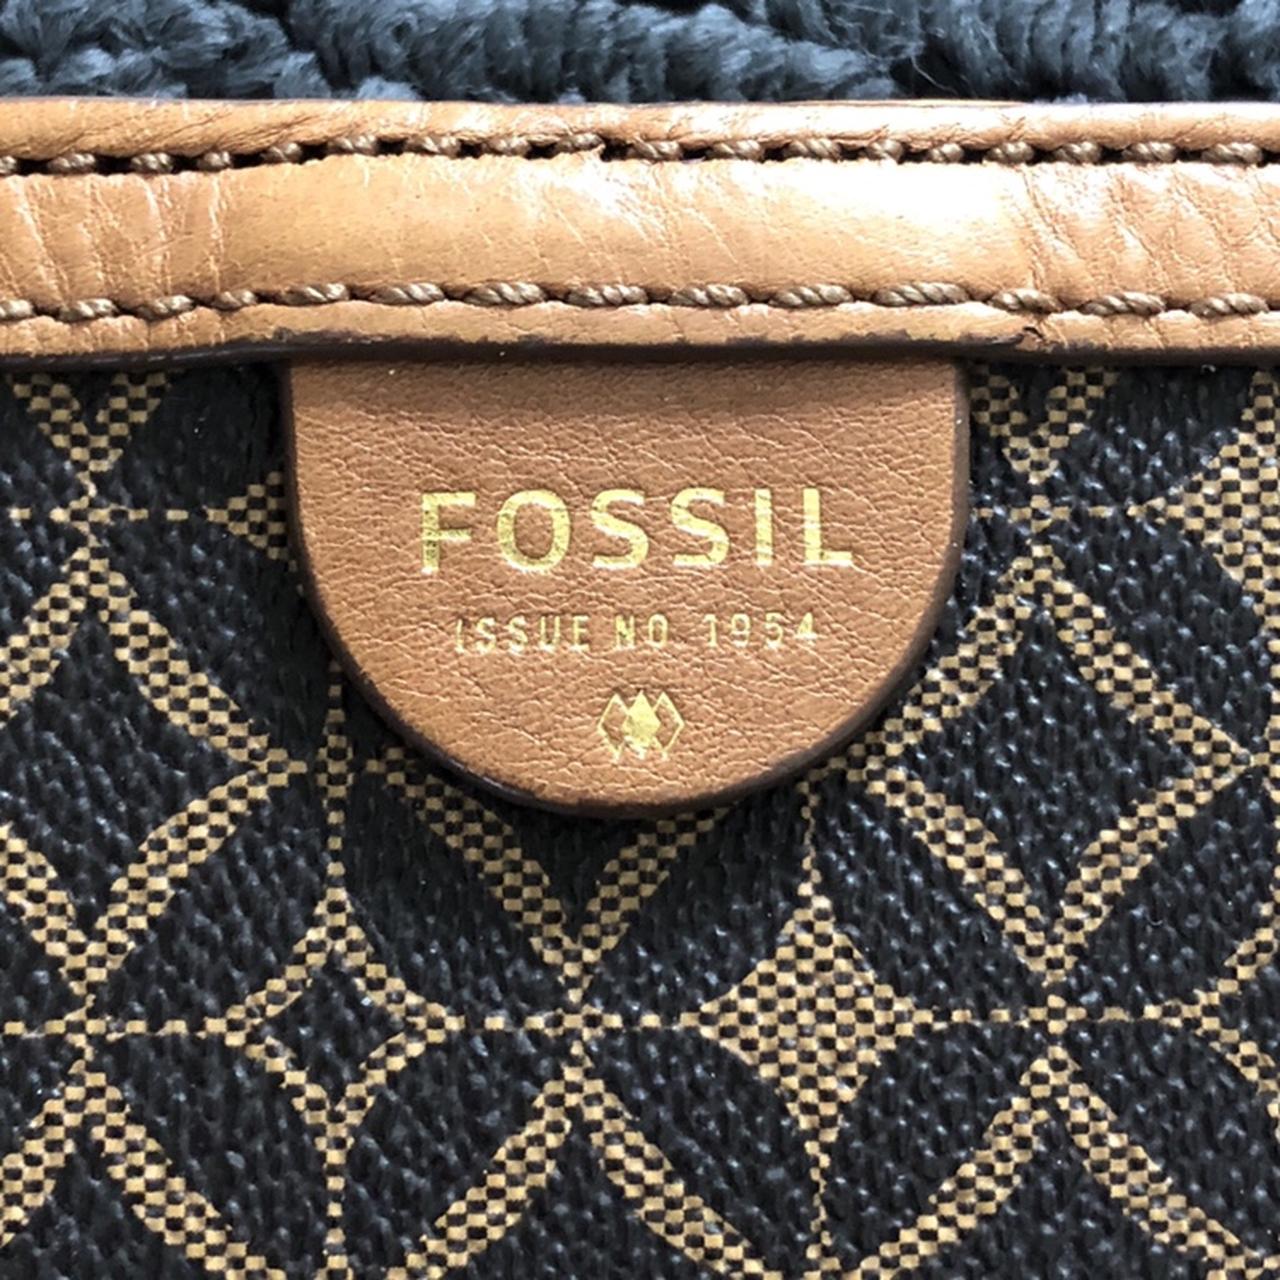 Fossil Long Live Vintage 1954 Re-issue Maddox Genuine Leather Crossbody  Shoulder Bag in Medium Brown - Etsy